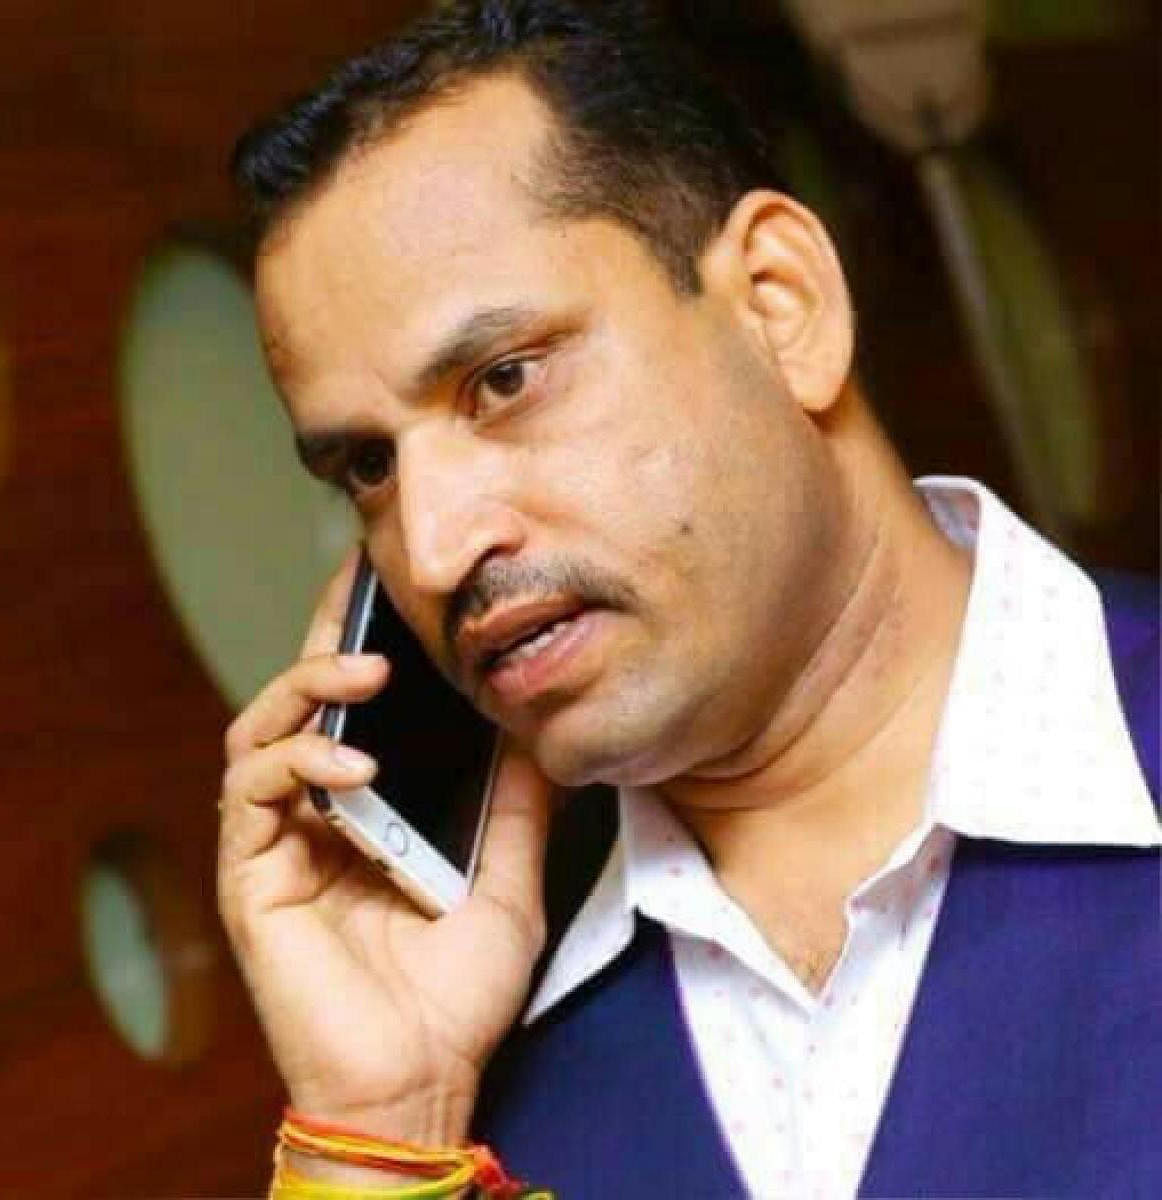 City Police Commissioner T Suneel Kumar ordered departmental enquiry against Annaurneshwari Nagar police inspector Krishna K Lamani for involving in civil dispute and ordering to demolish the compound wall belong to advocate KB Gopalakrishna.